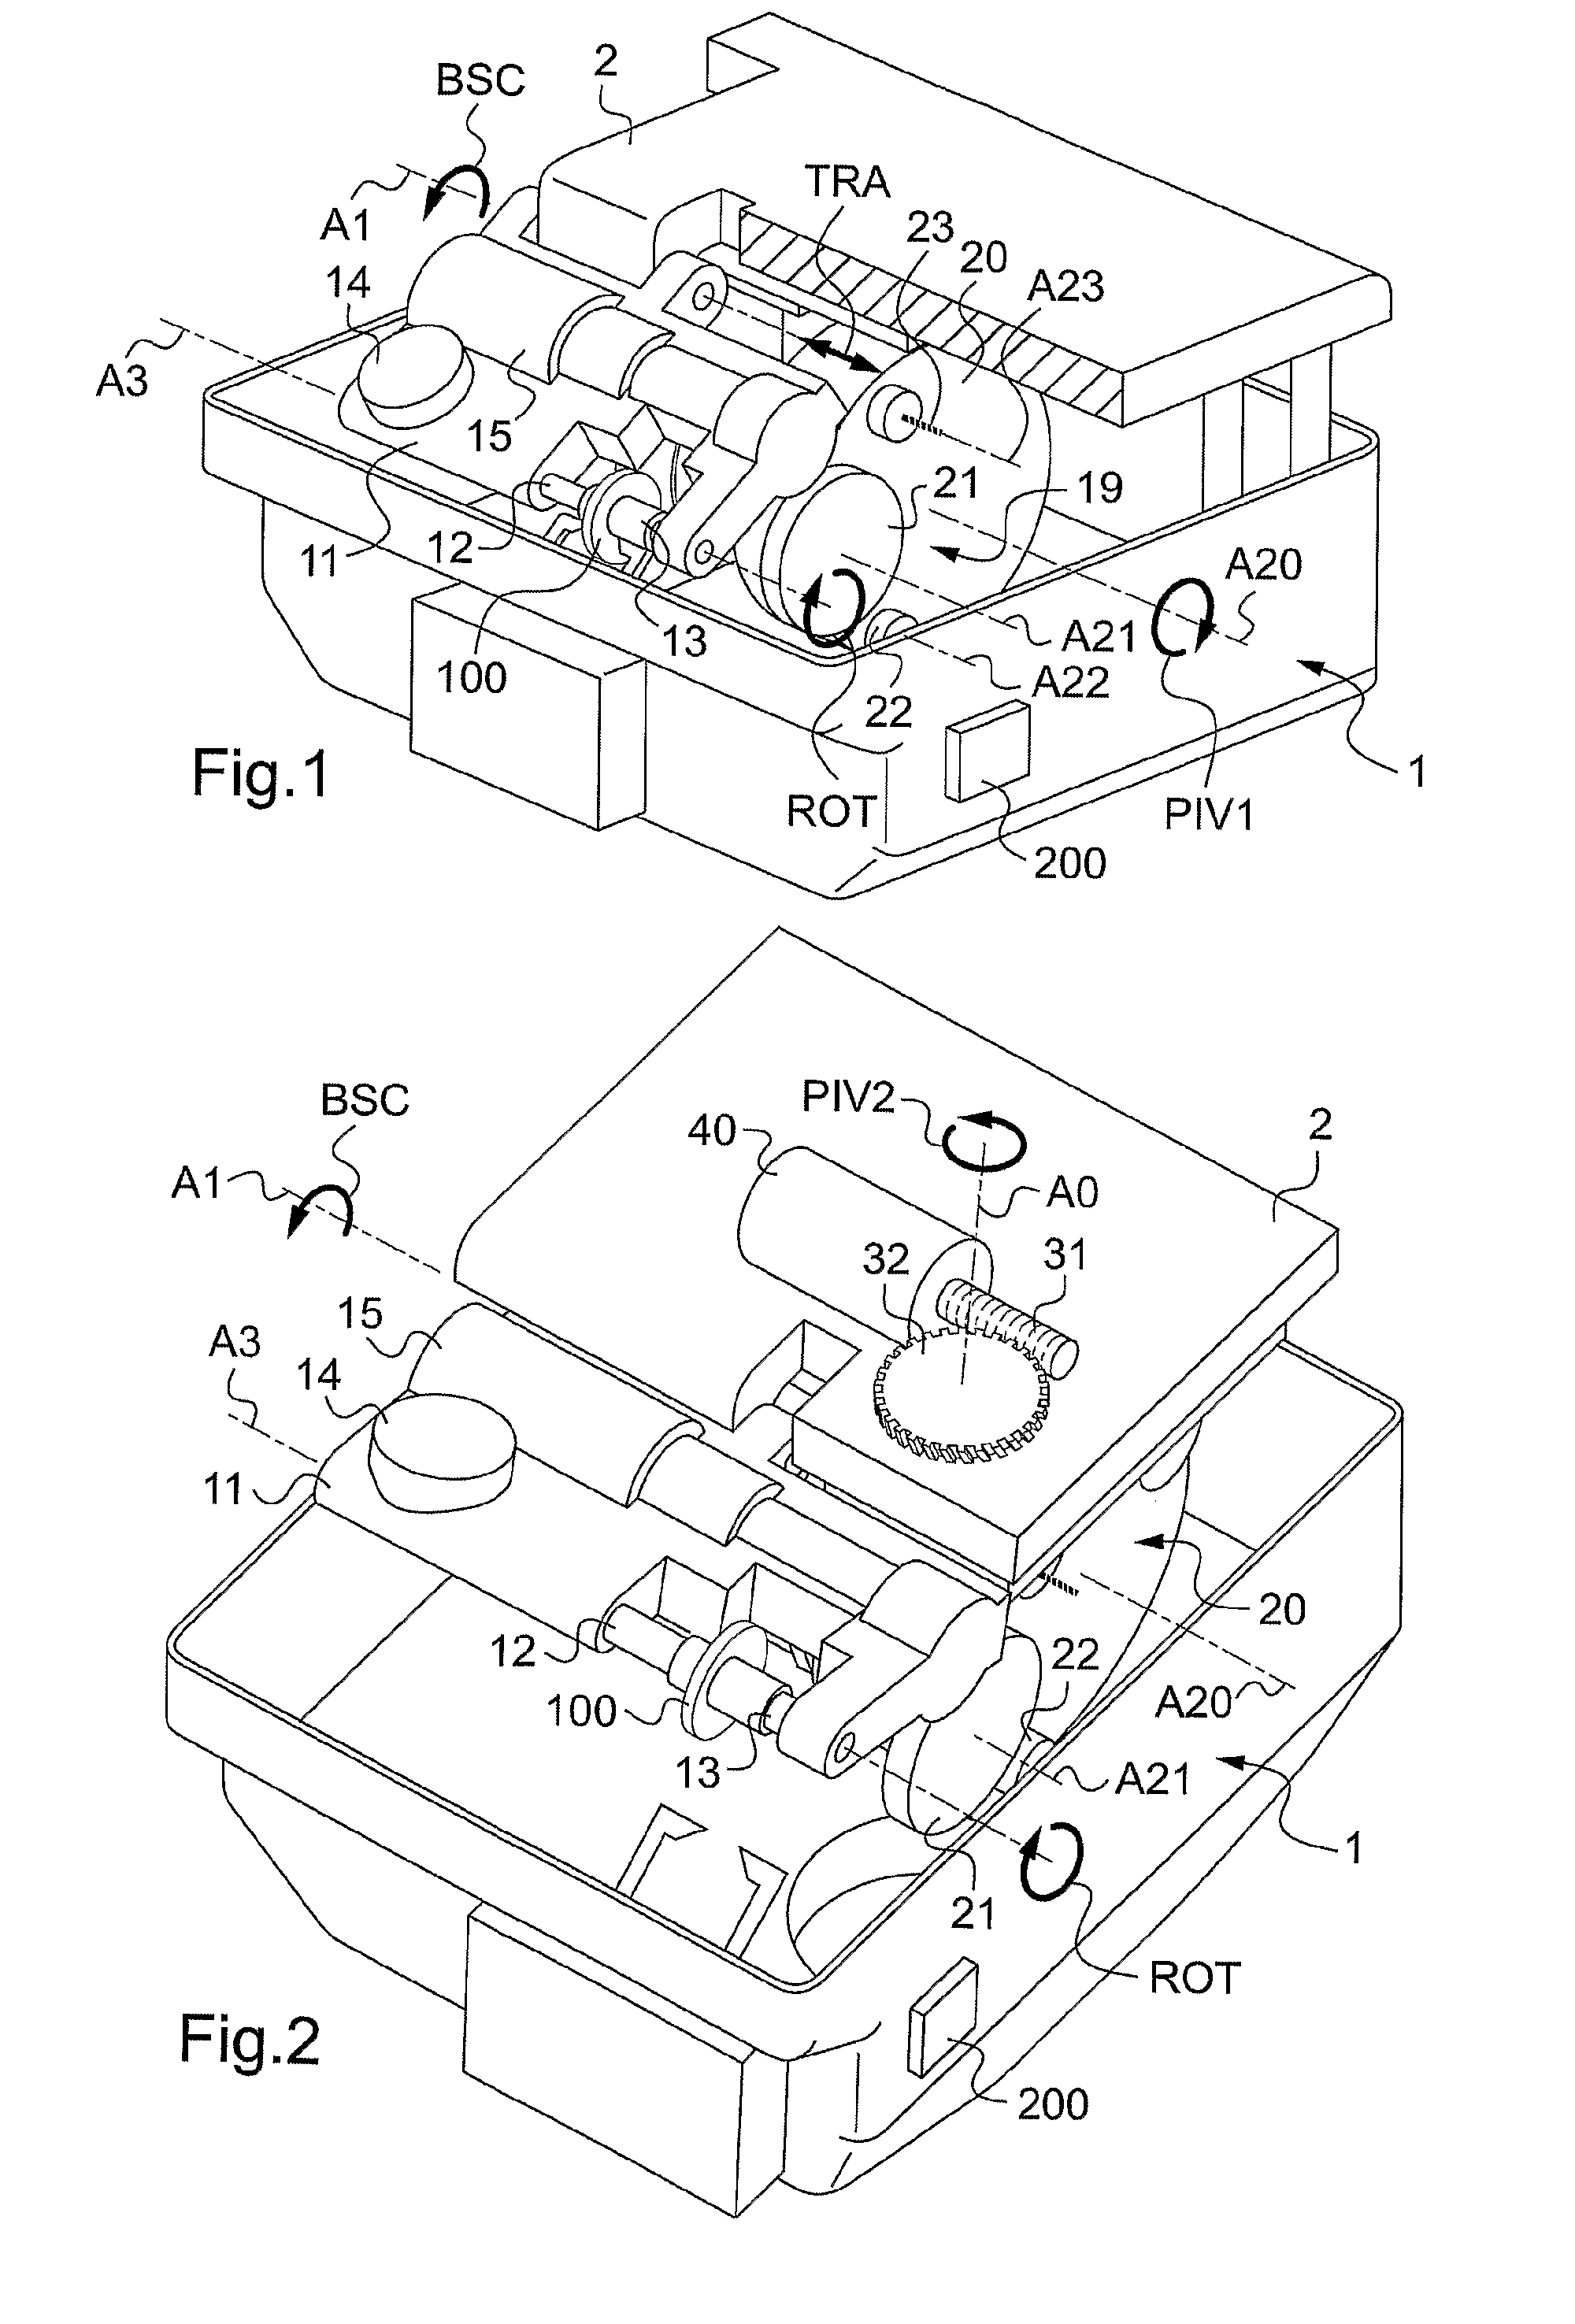 Machine for shaping an eyeglass lens, the machine being provided with a turnable tool-carrier having a plurality of working tools mounted thereon